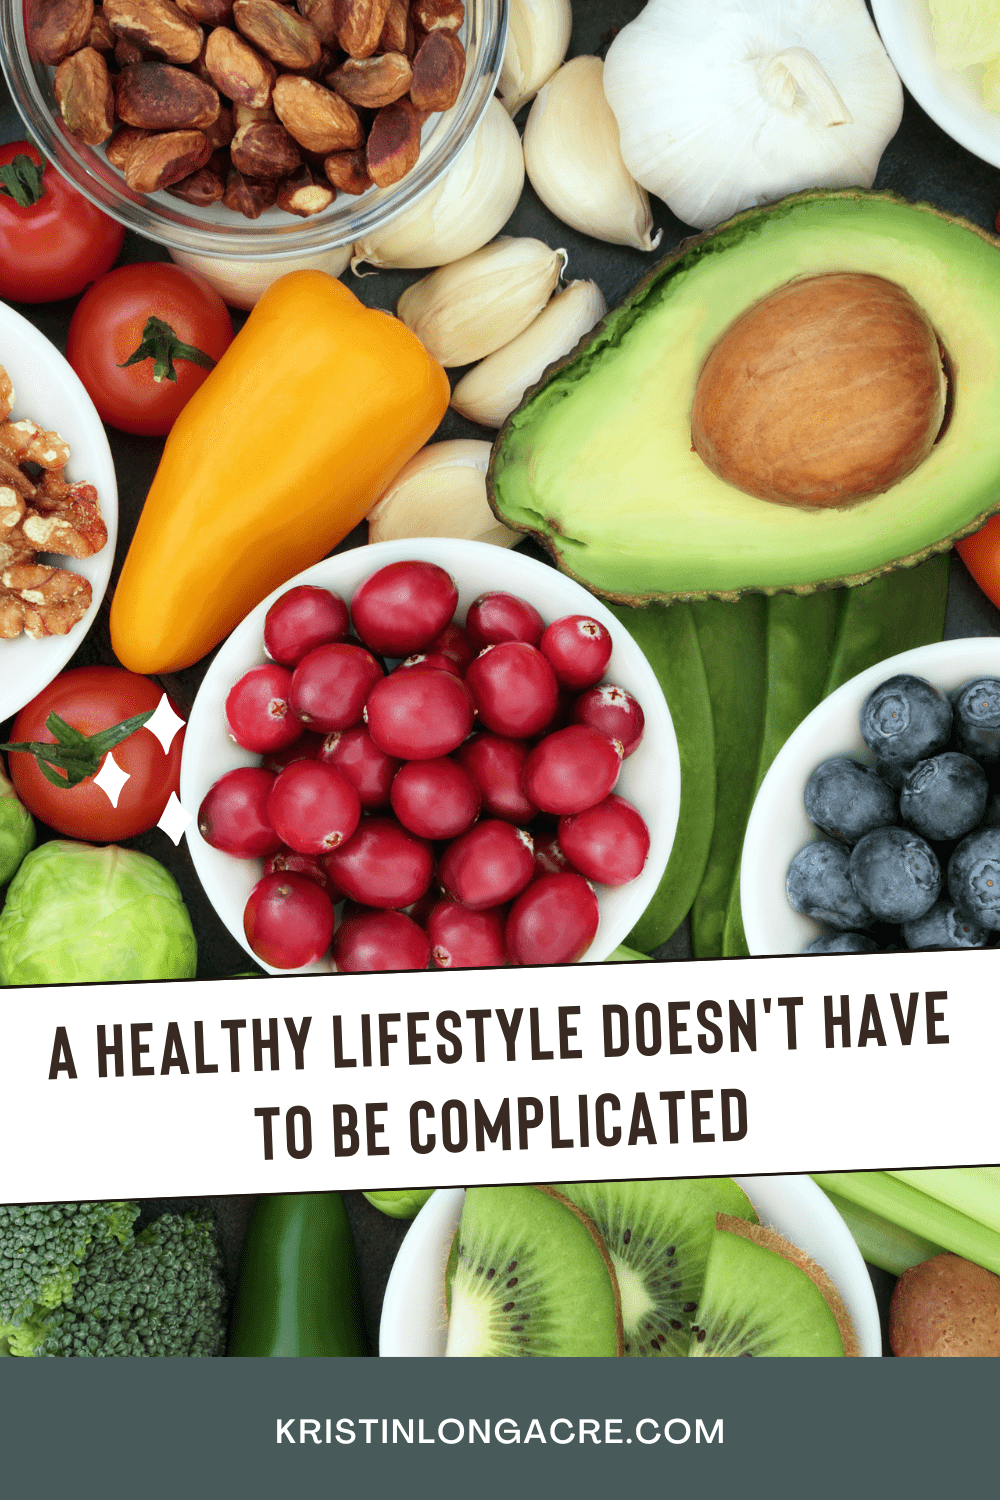 A Healthy Lifestyle Doesn't Have to Be Complicated